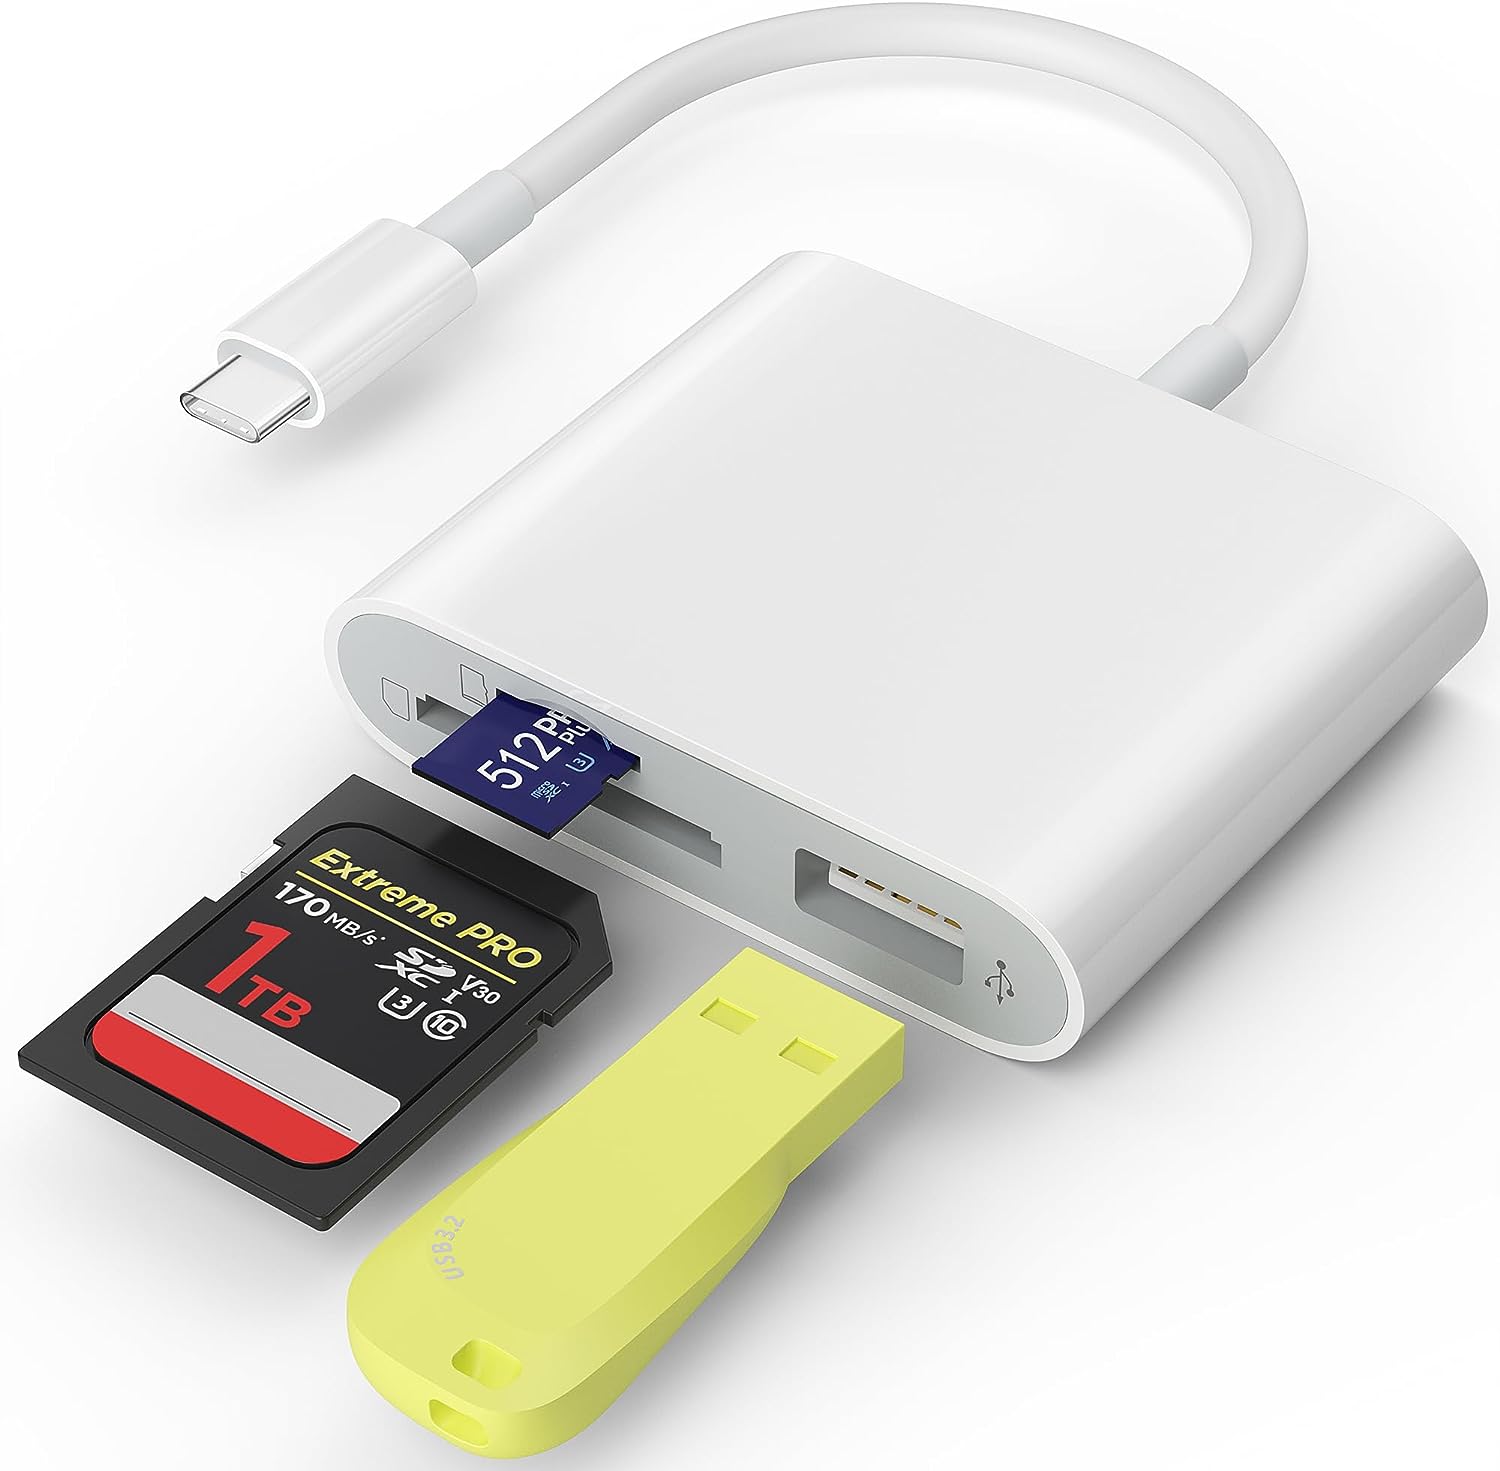 Top 6 SD Card Readers for iPhone